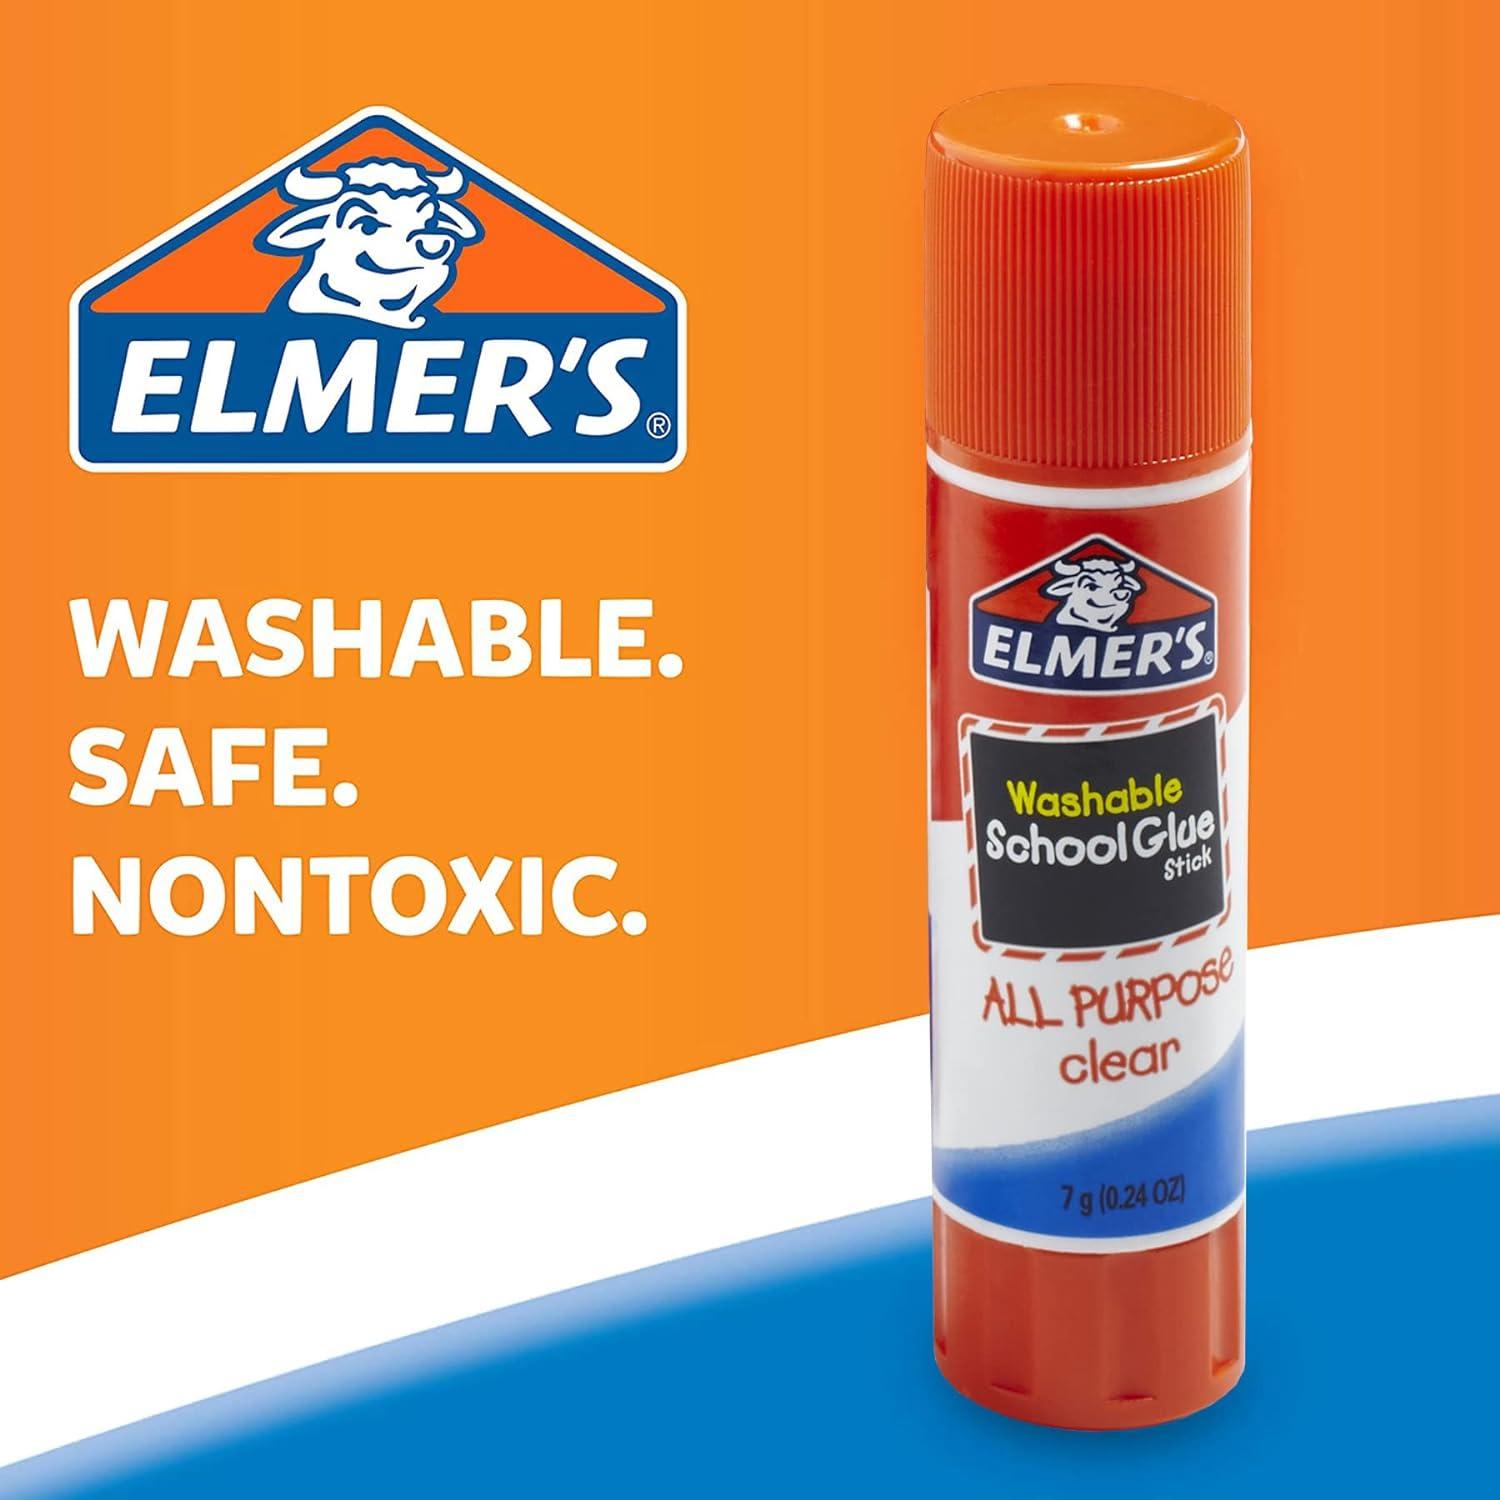  Elmer's washable clear glue 4 count